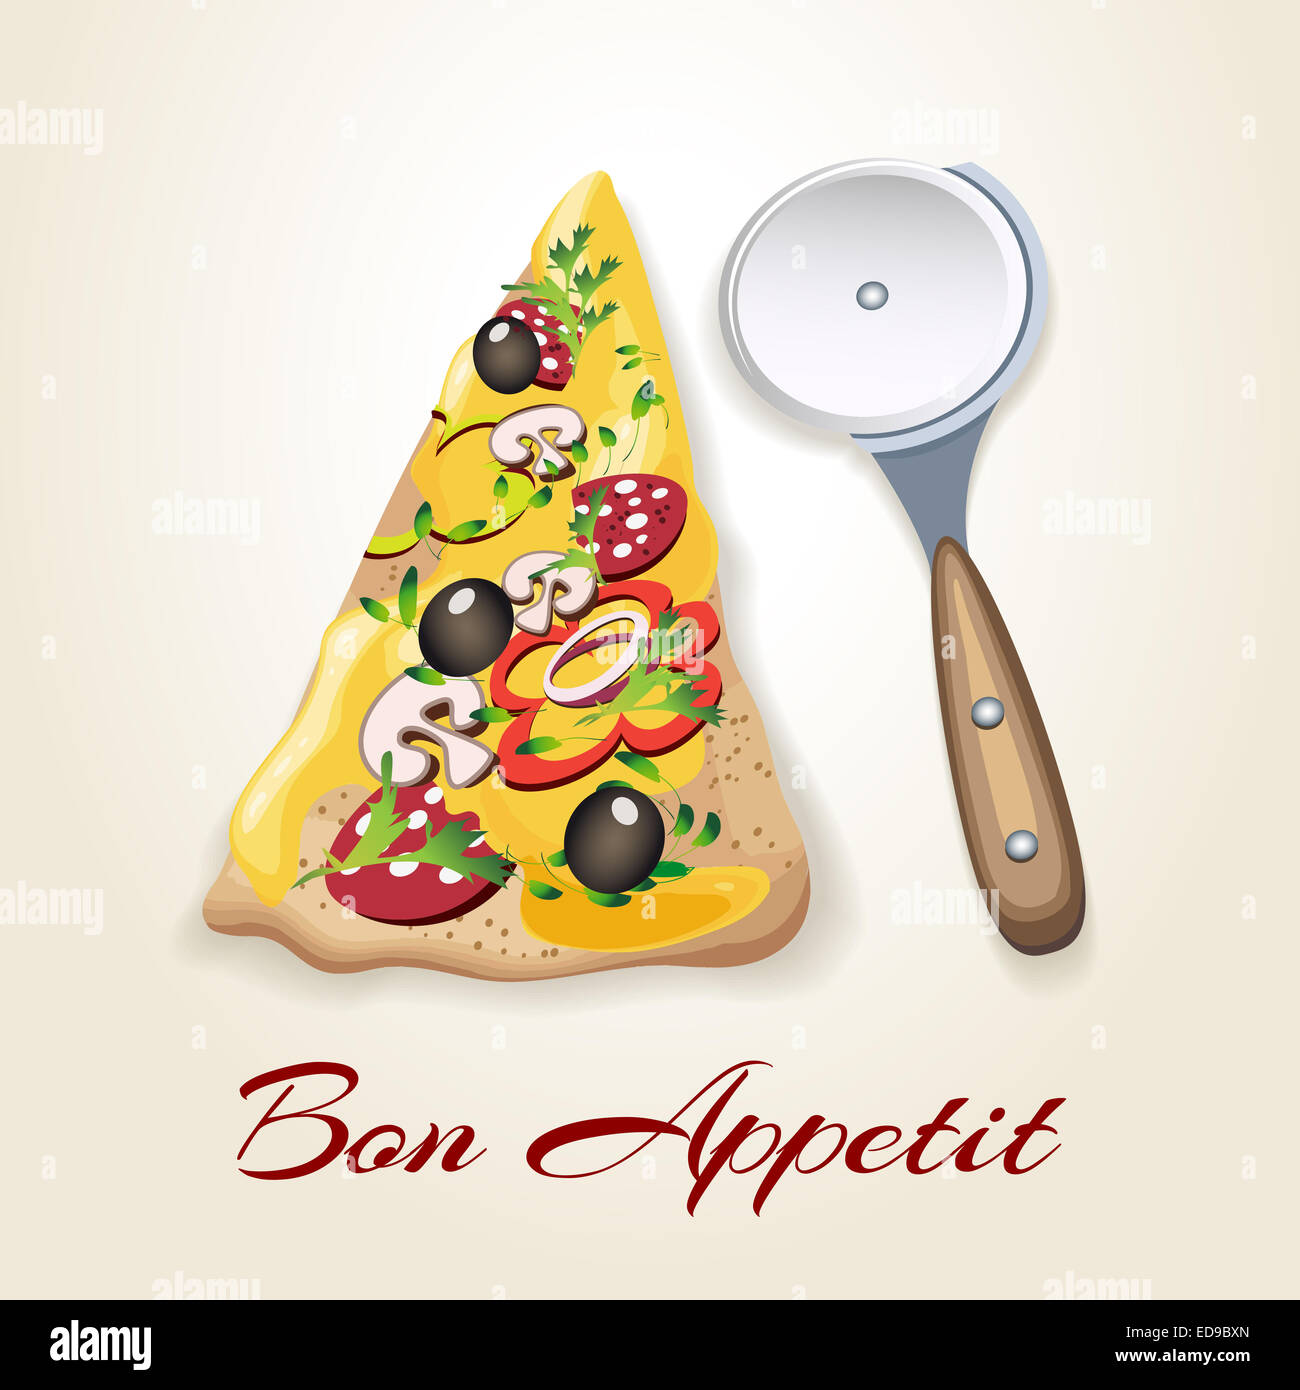 Illustration of pizza piece, rolling pizza knife and wording Stock Photo